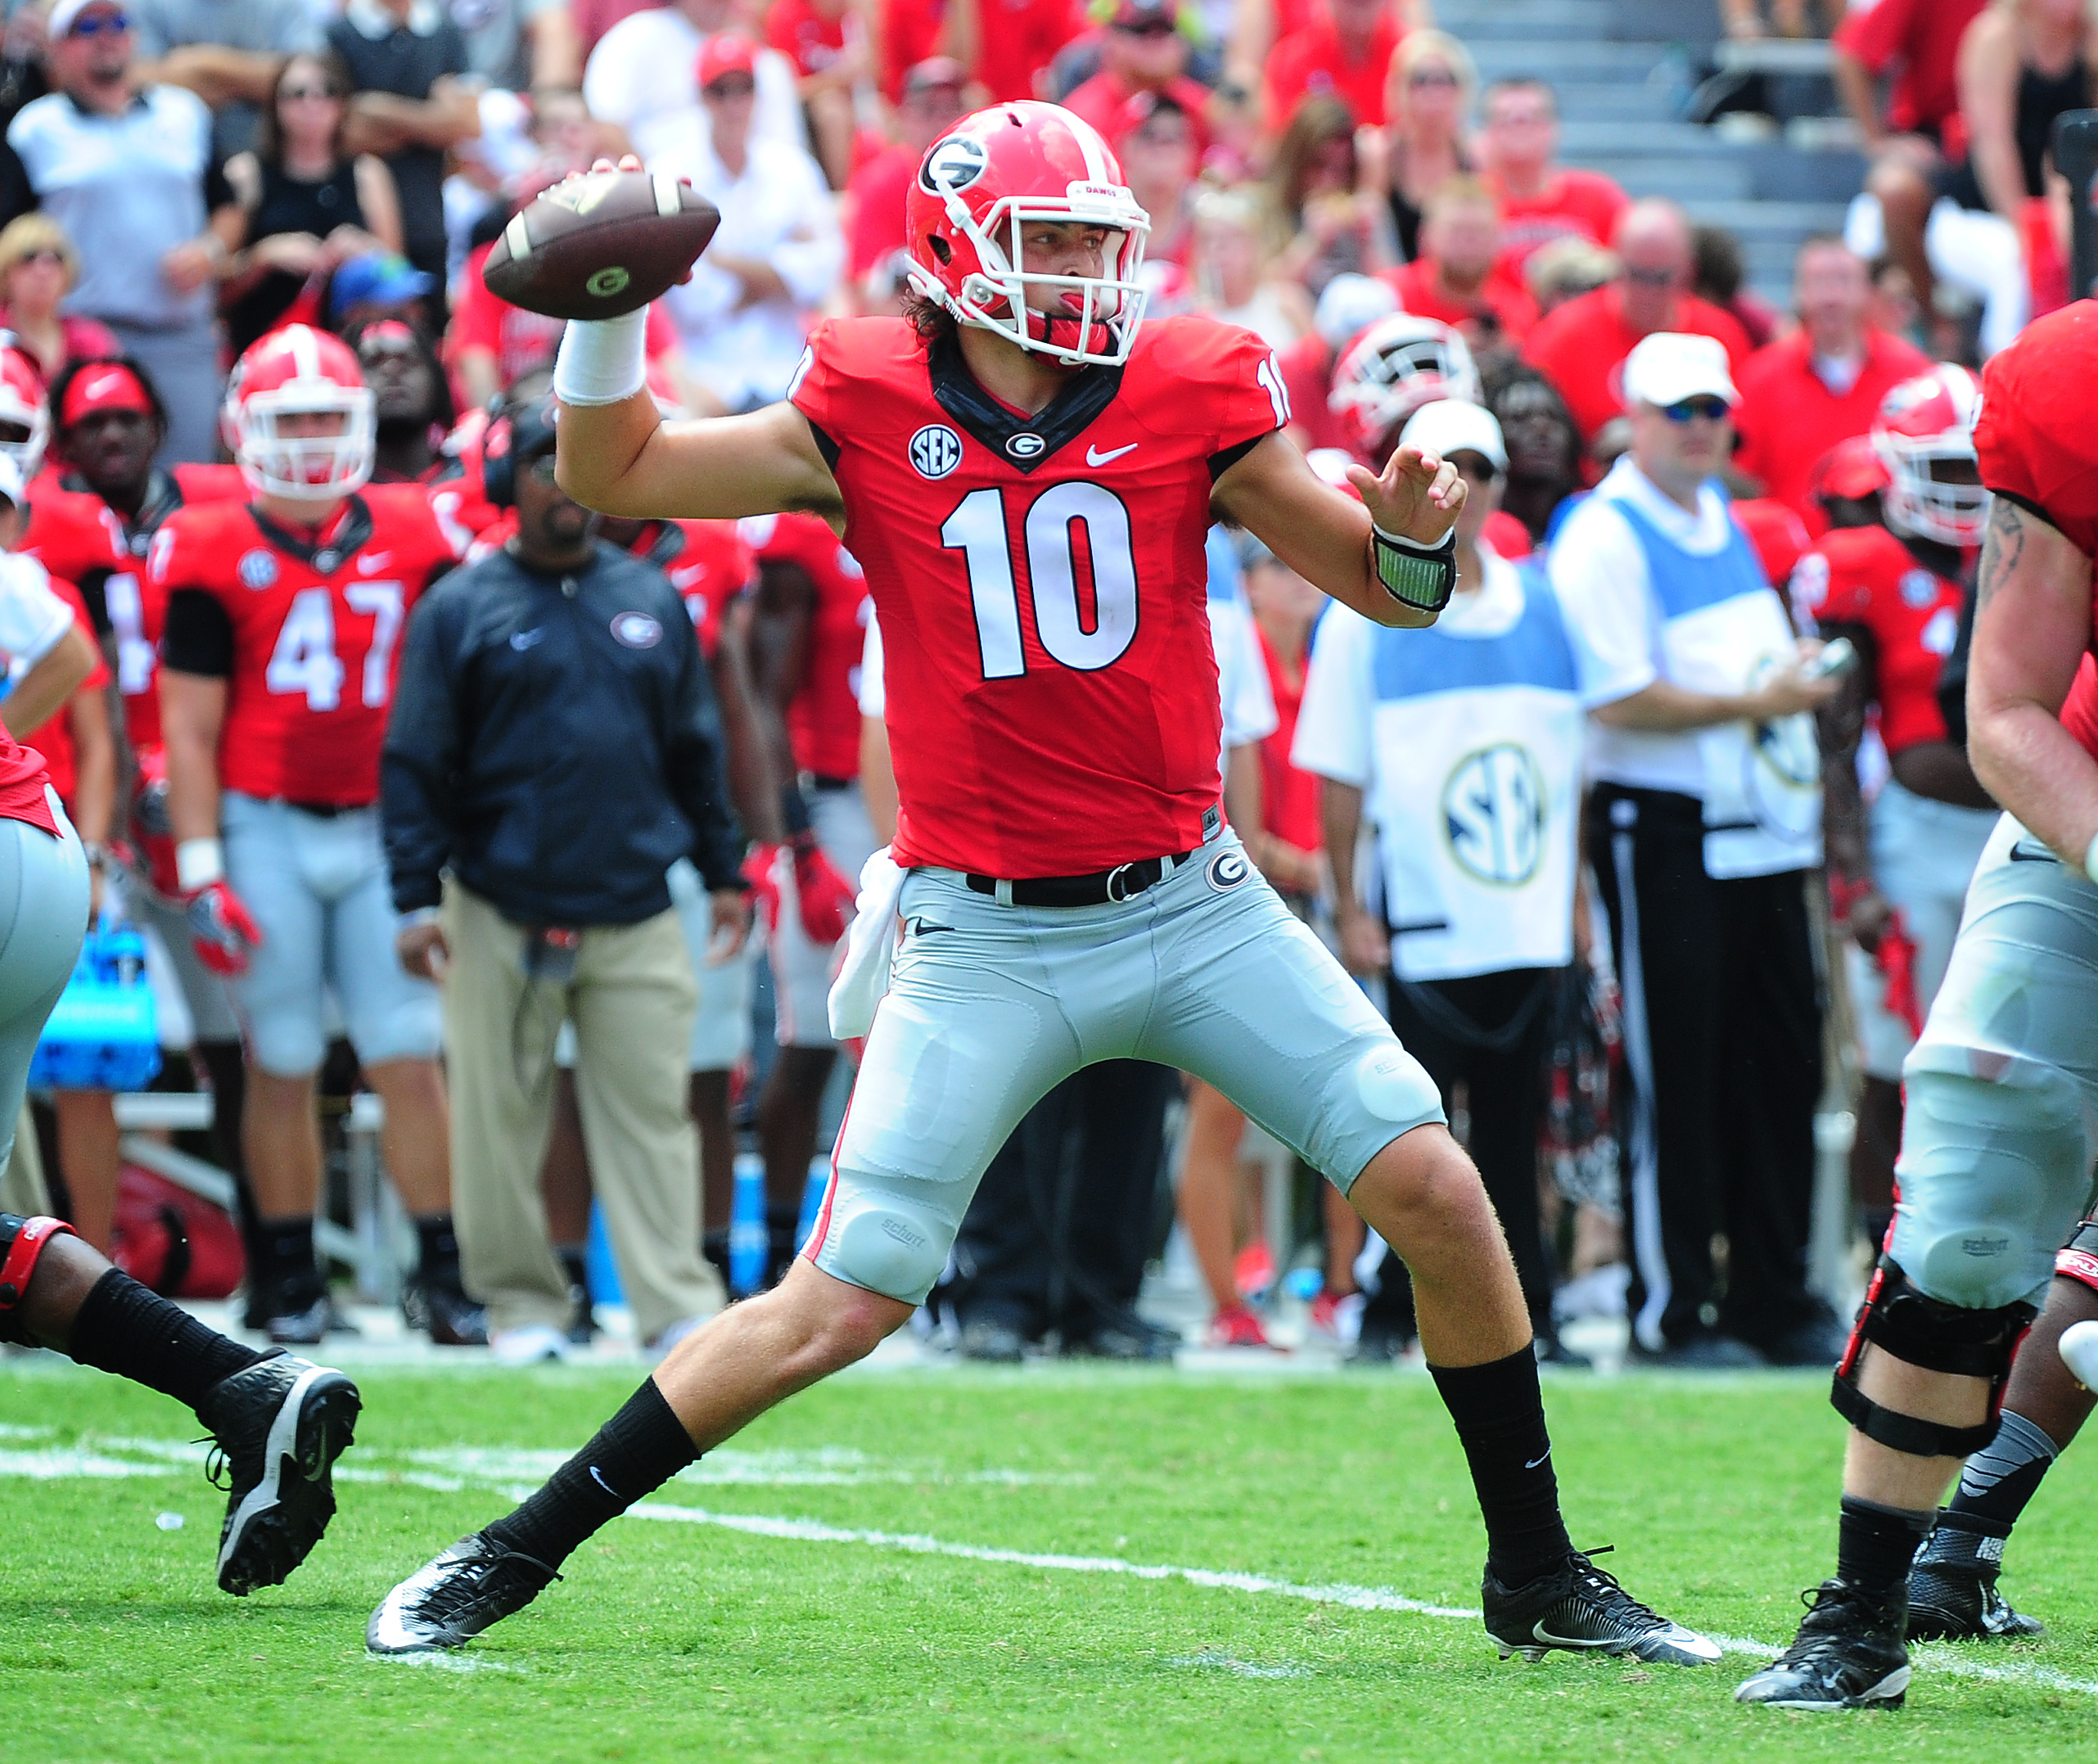 Freshman quarterback Jacob Eason and the Dawgs are 4-2 at the halfway point of the season. (Photo by Scott Cunningham/Getty Images)